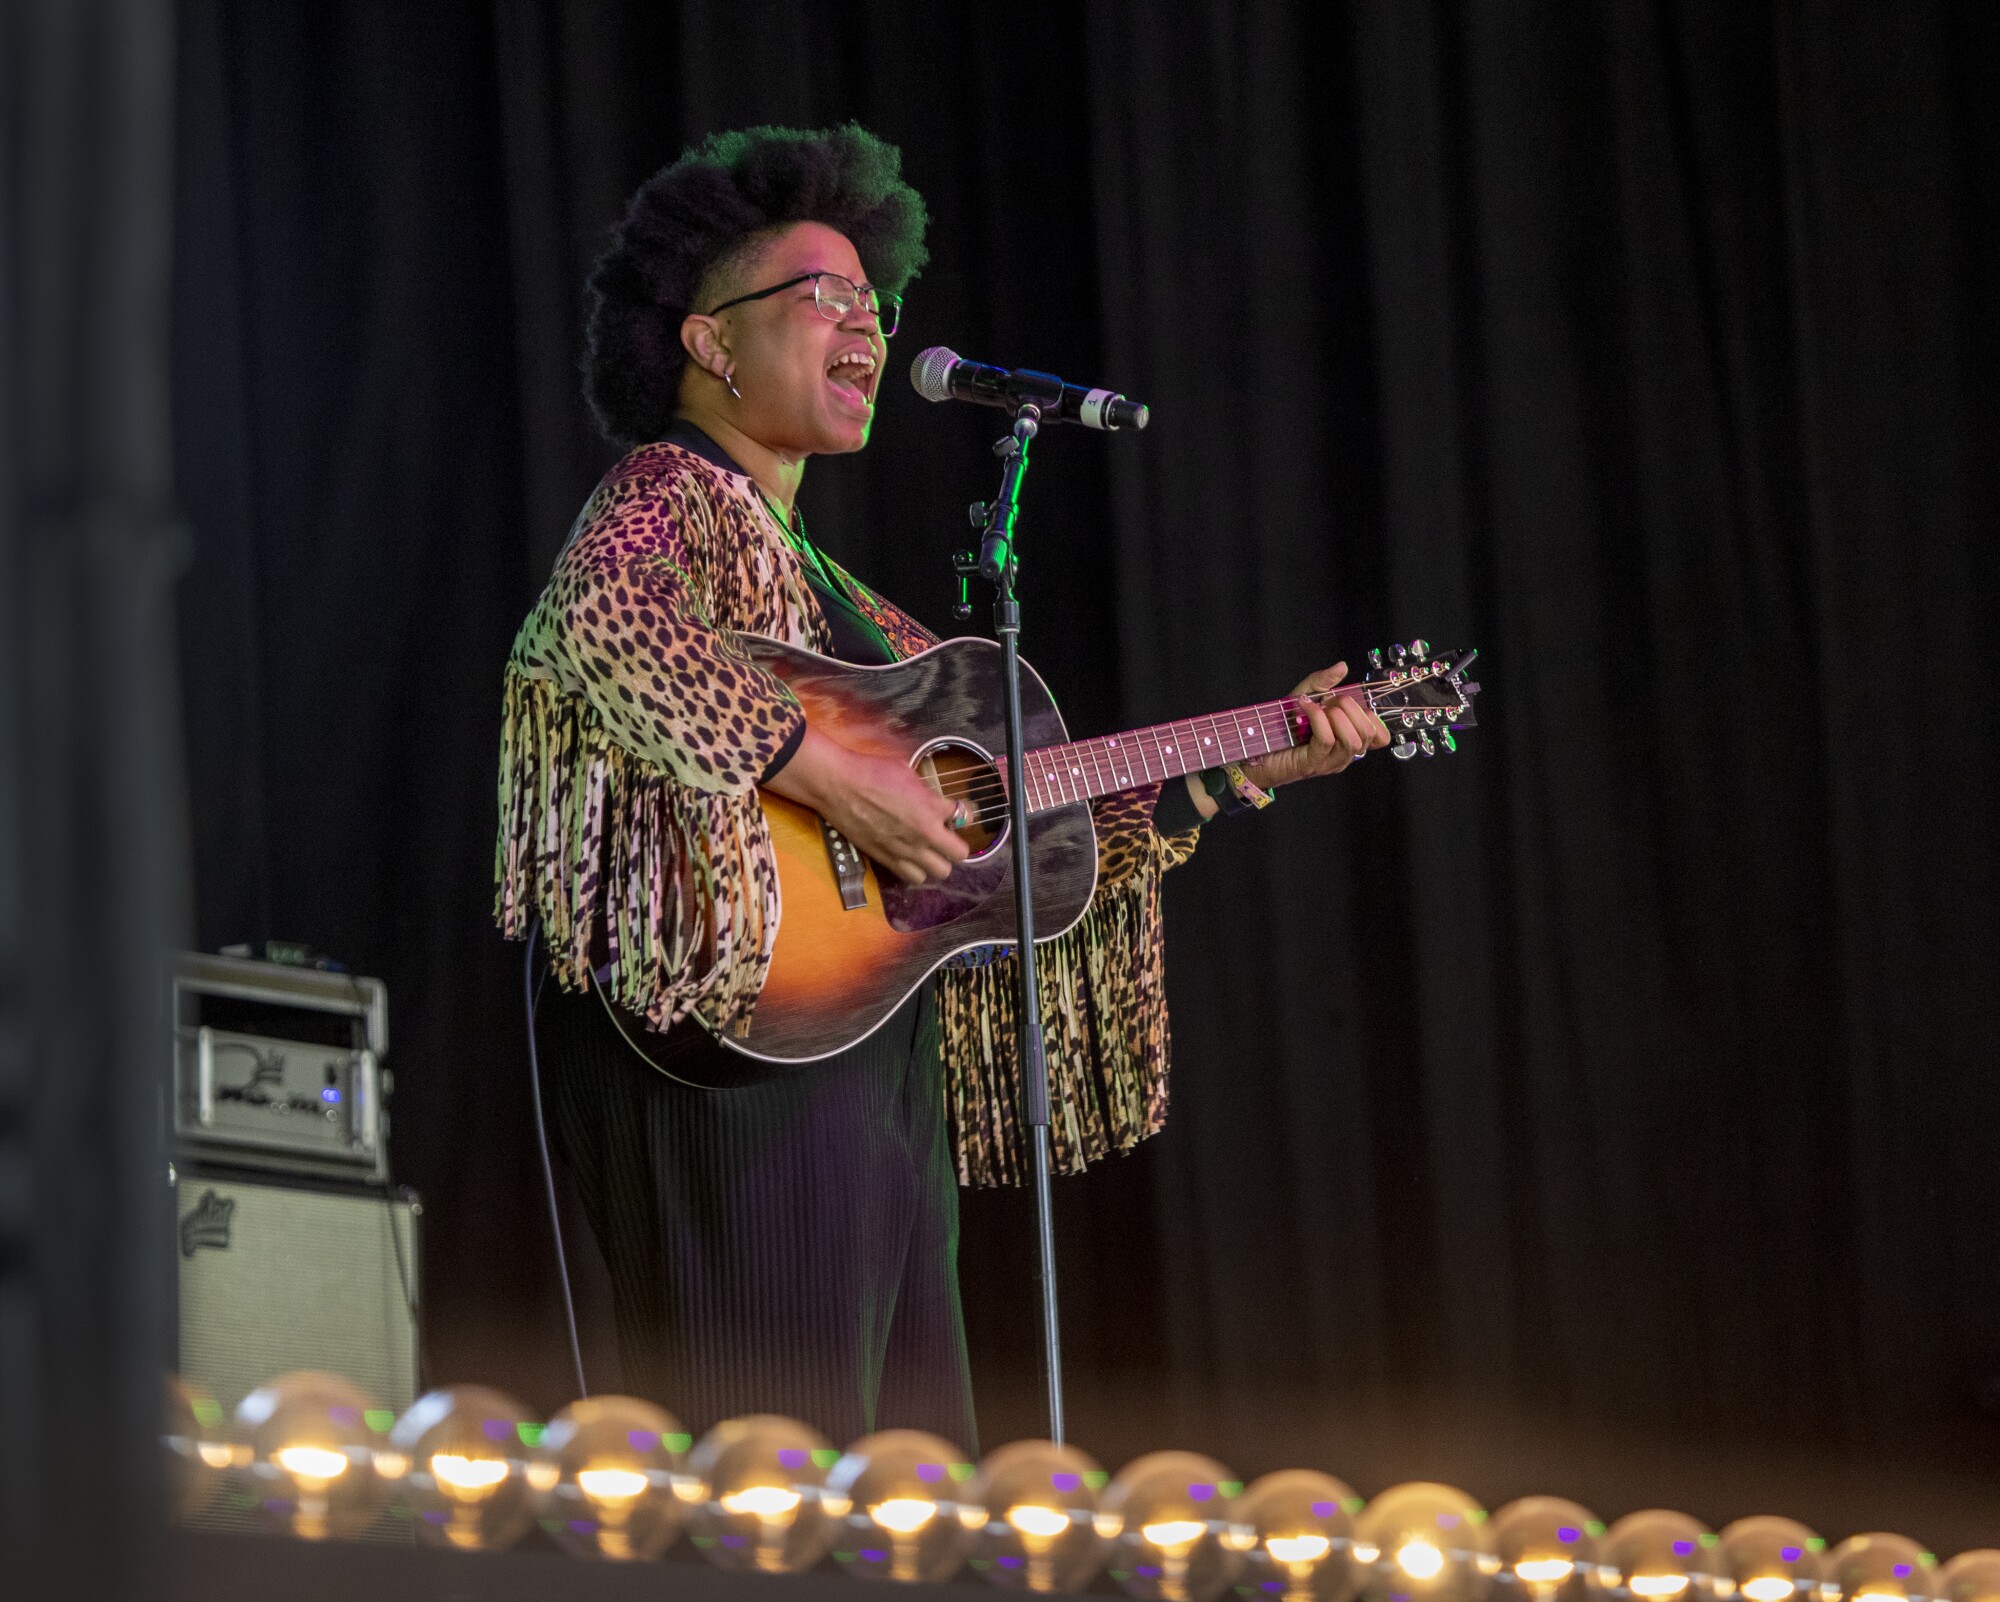 Amythyst Kiah plays the guitar and sings onstage